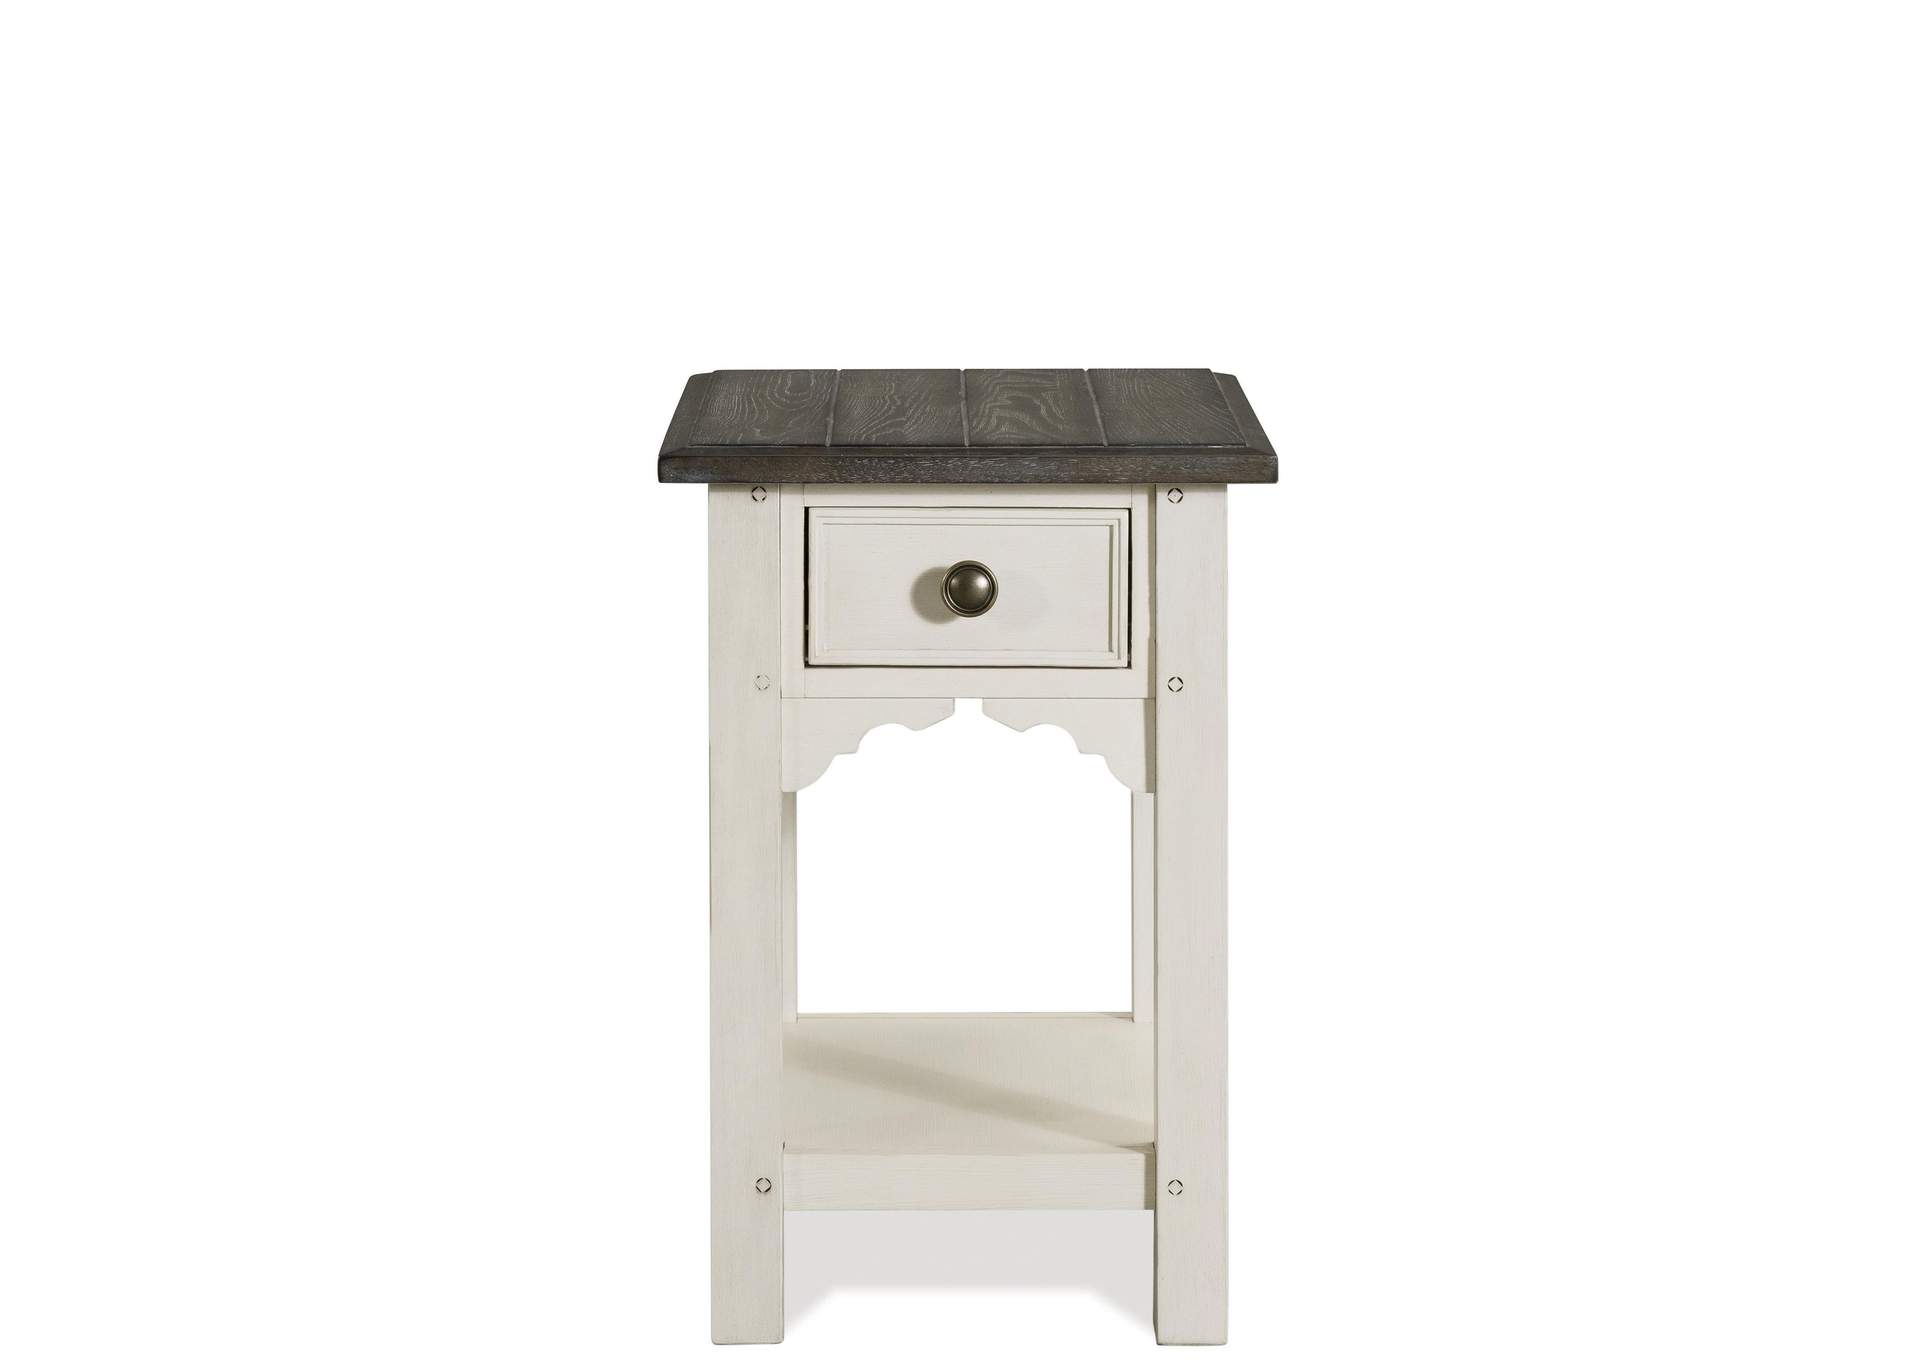 Grand Haven Chairside Table,Riverside